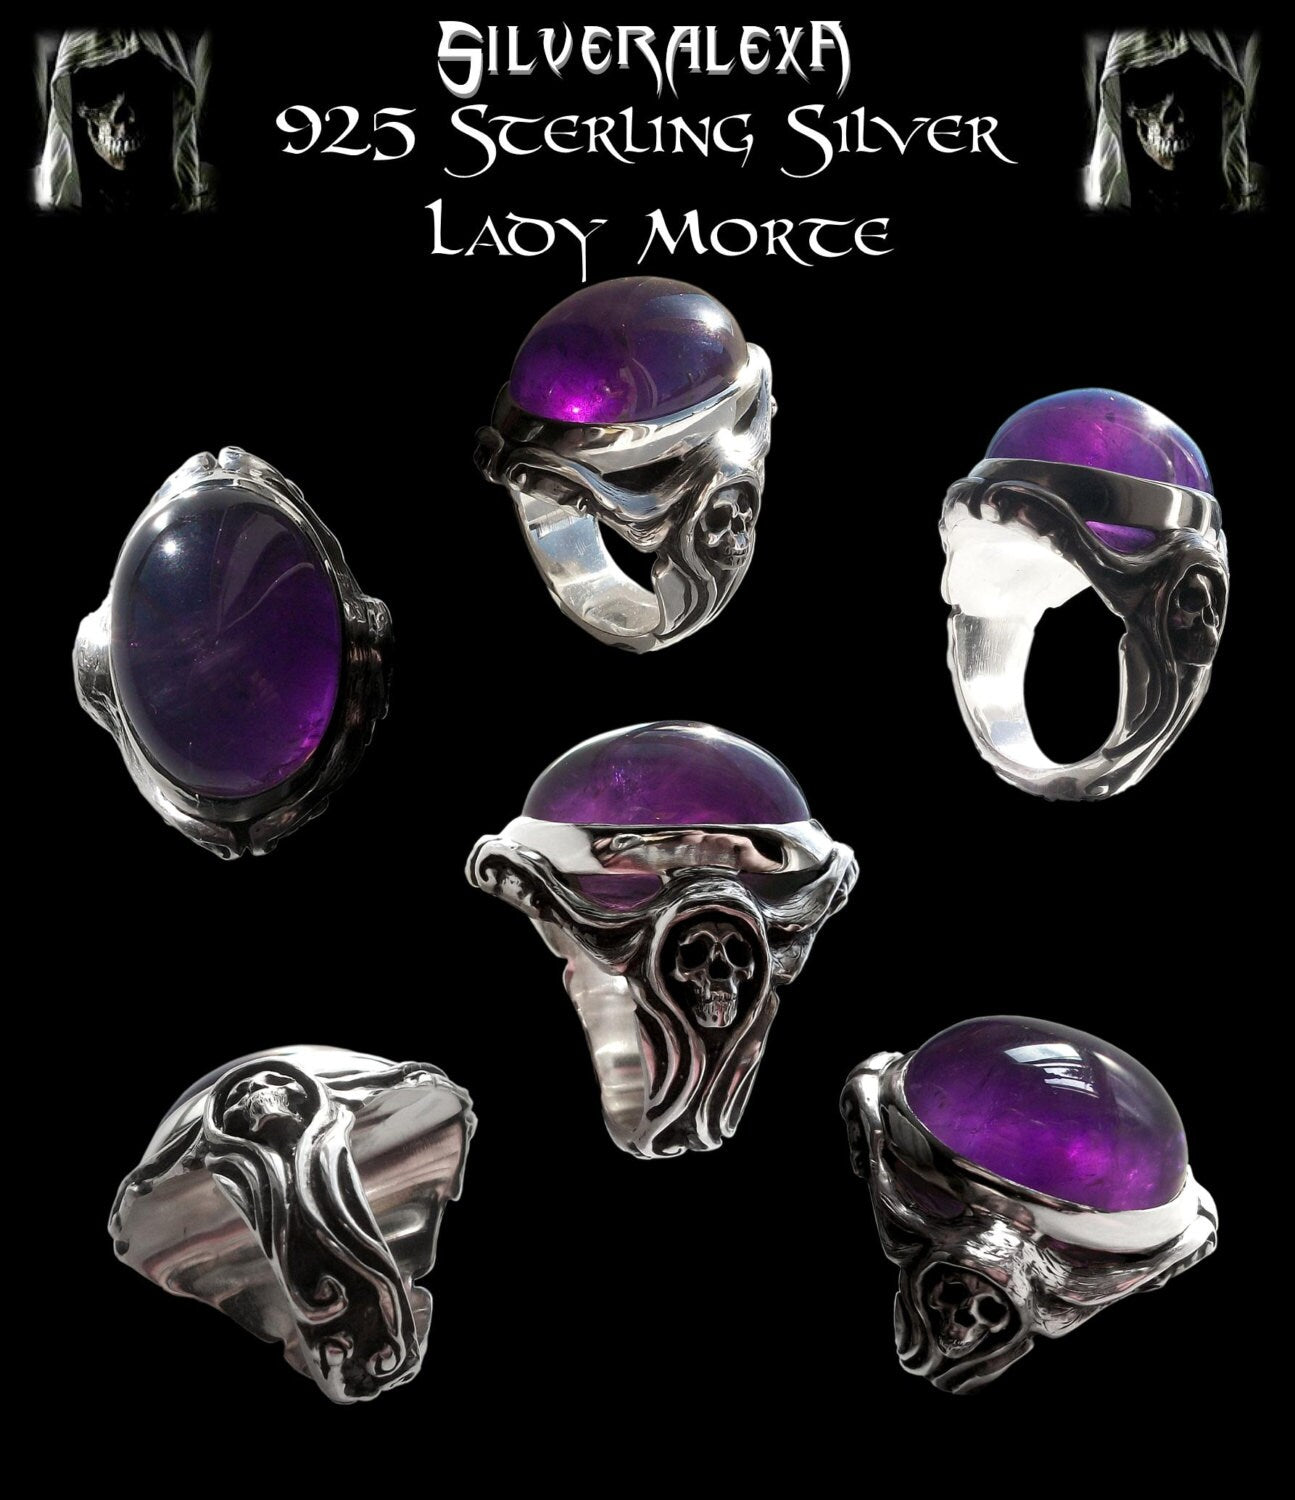 Skull ring - Sterling Silver Art Nouveau Engagement Skull Ring with amethyst - Lady Morte ring - ALL Sizes